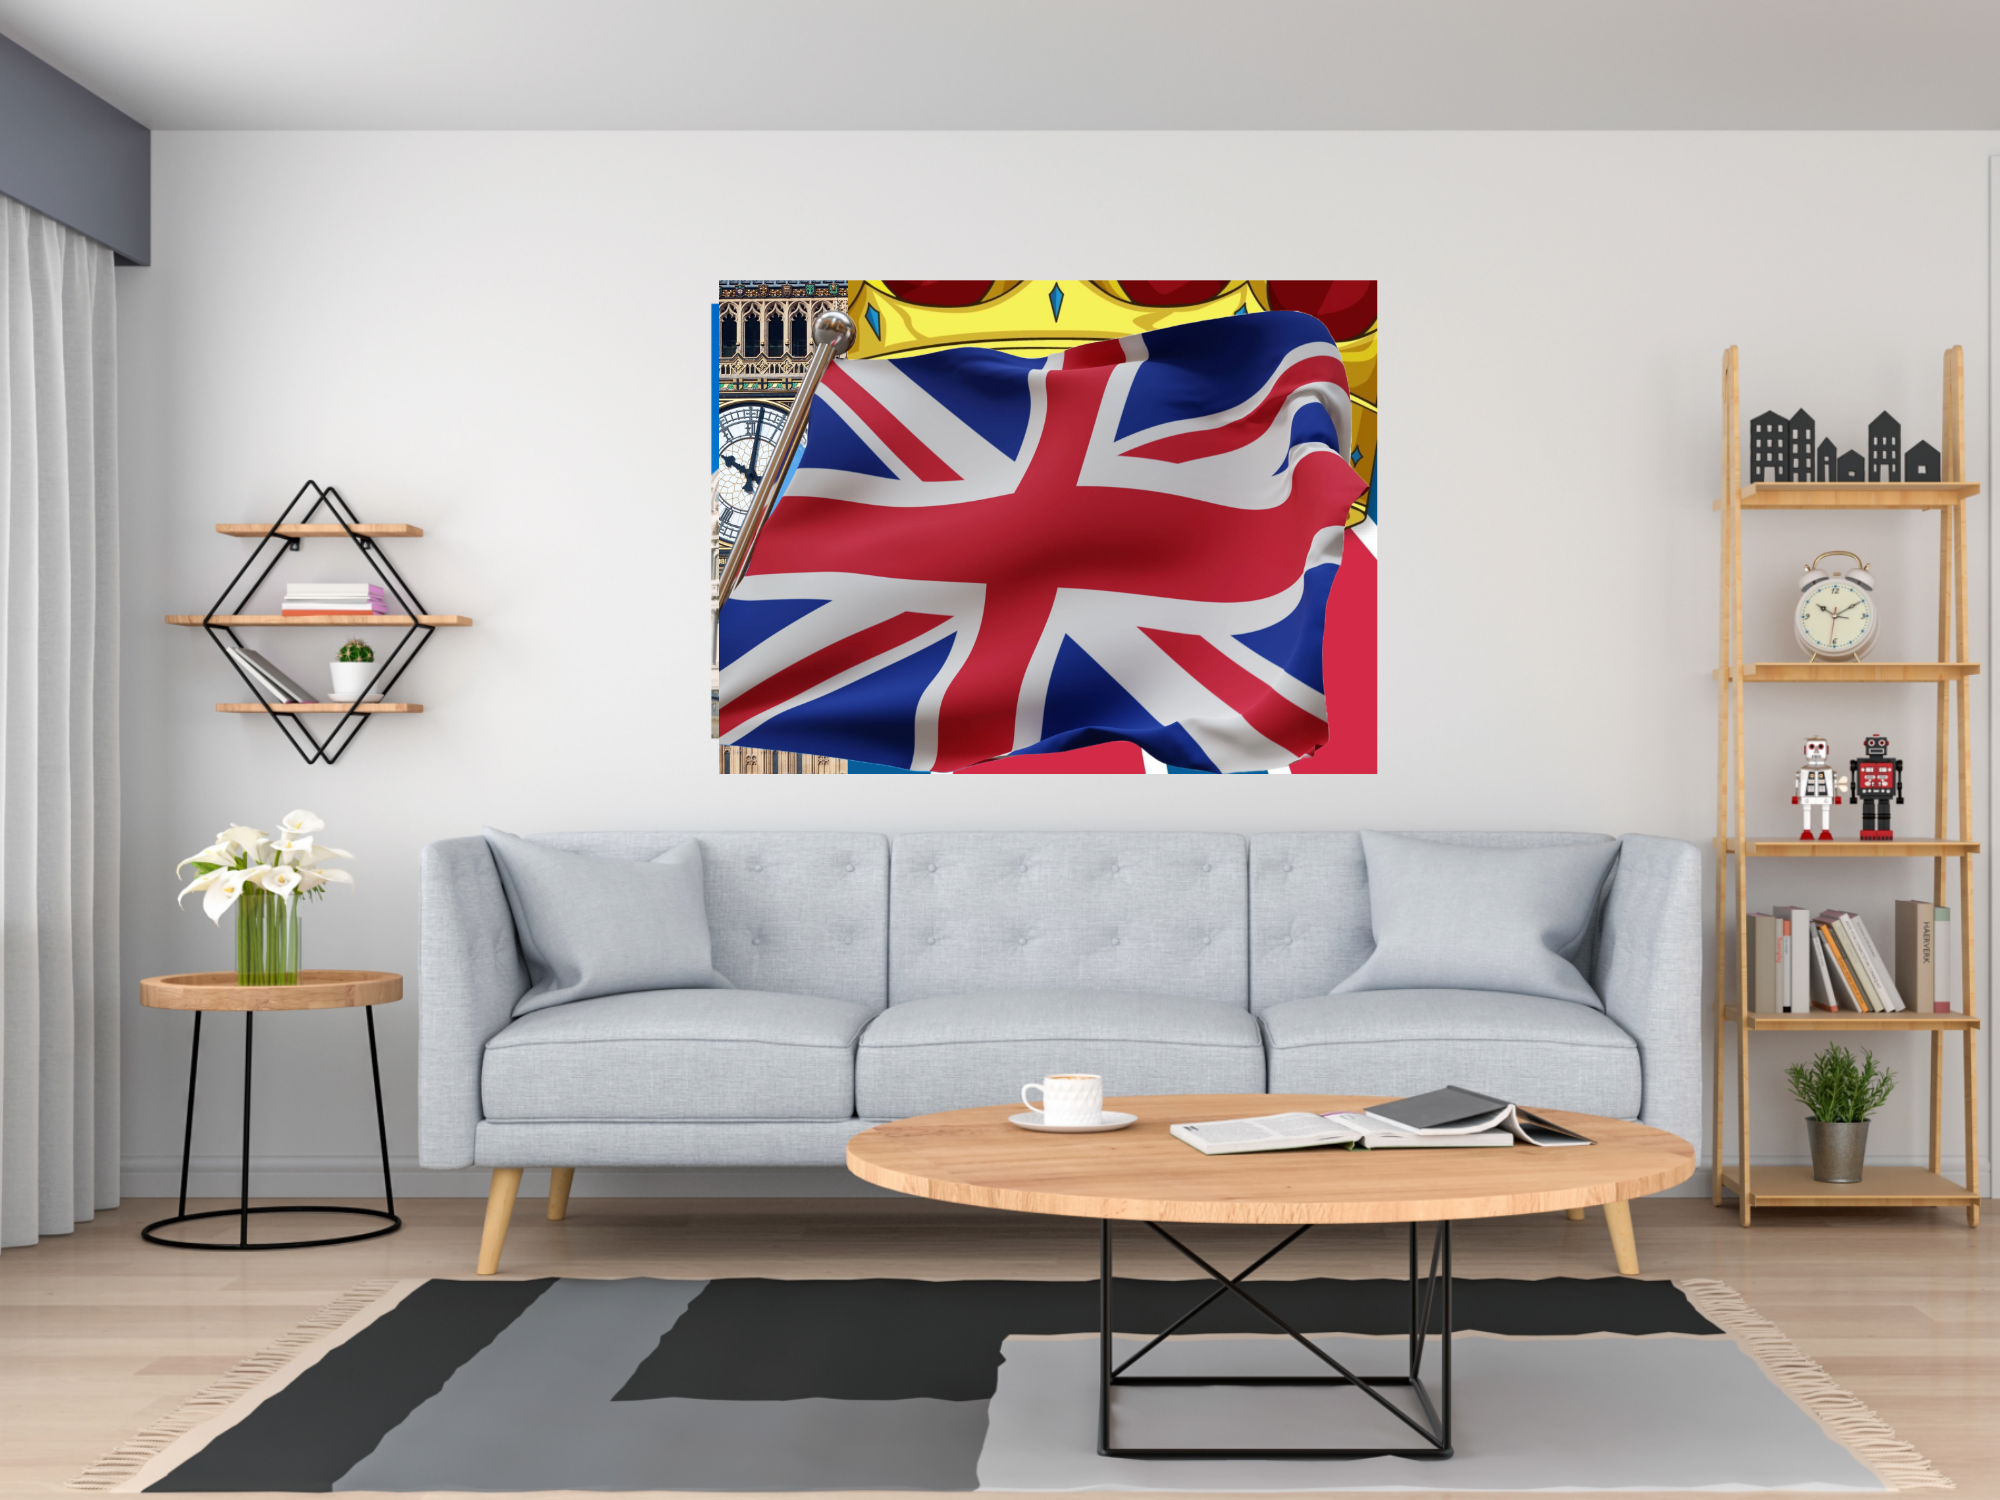 Wall Art UNITED KINGDOM UK Flag  Canvas Print Painting GW Original Giclee Love Nice Beauty Fun Design Fit Hot House Home Office Gift Ready Hang